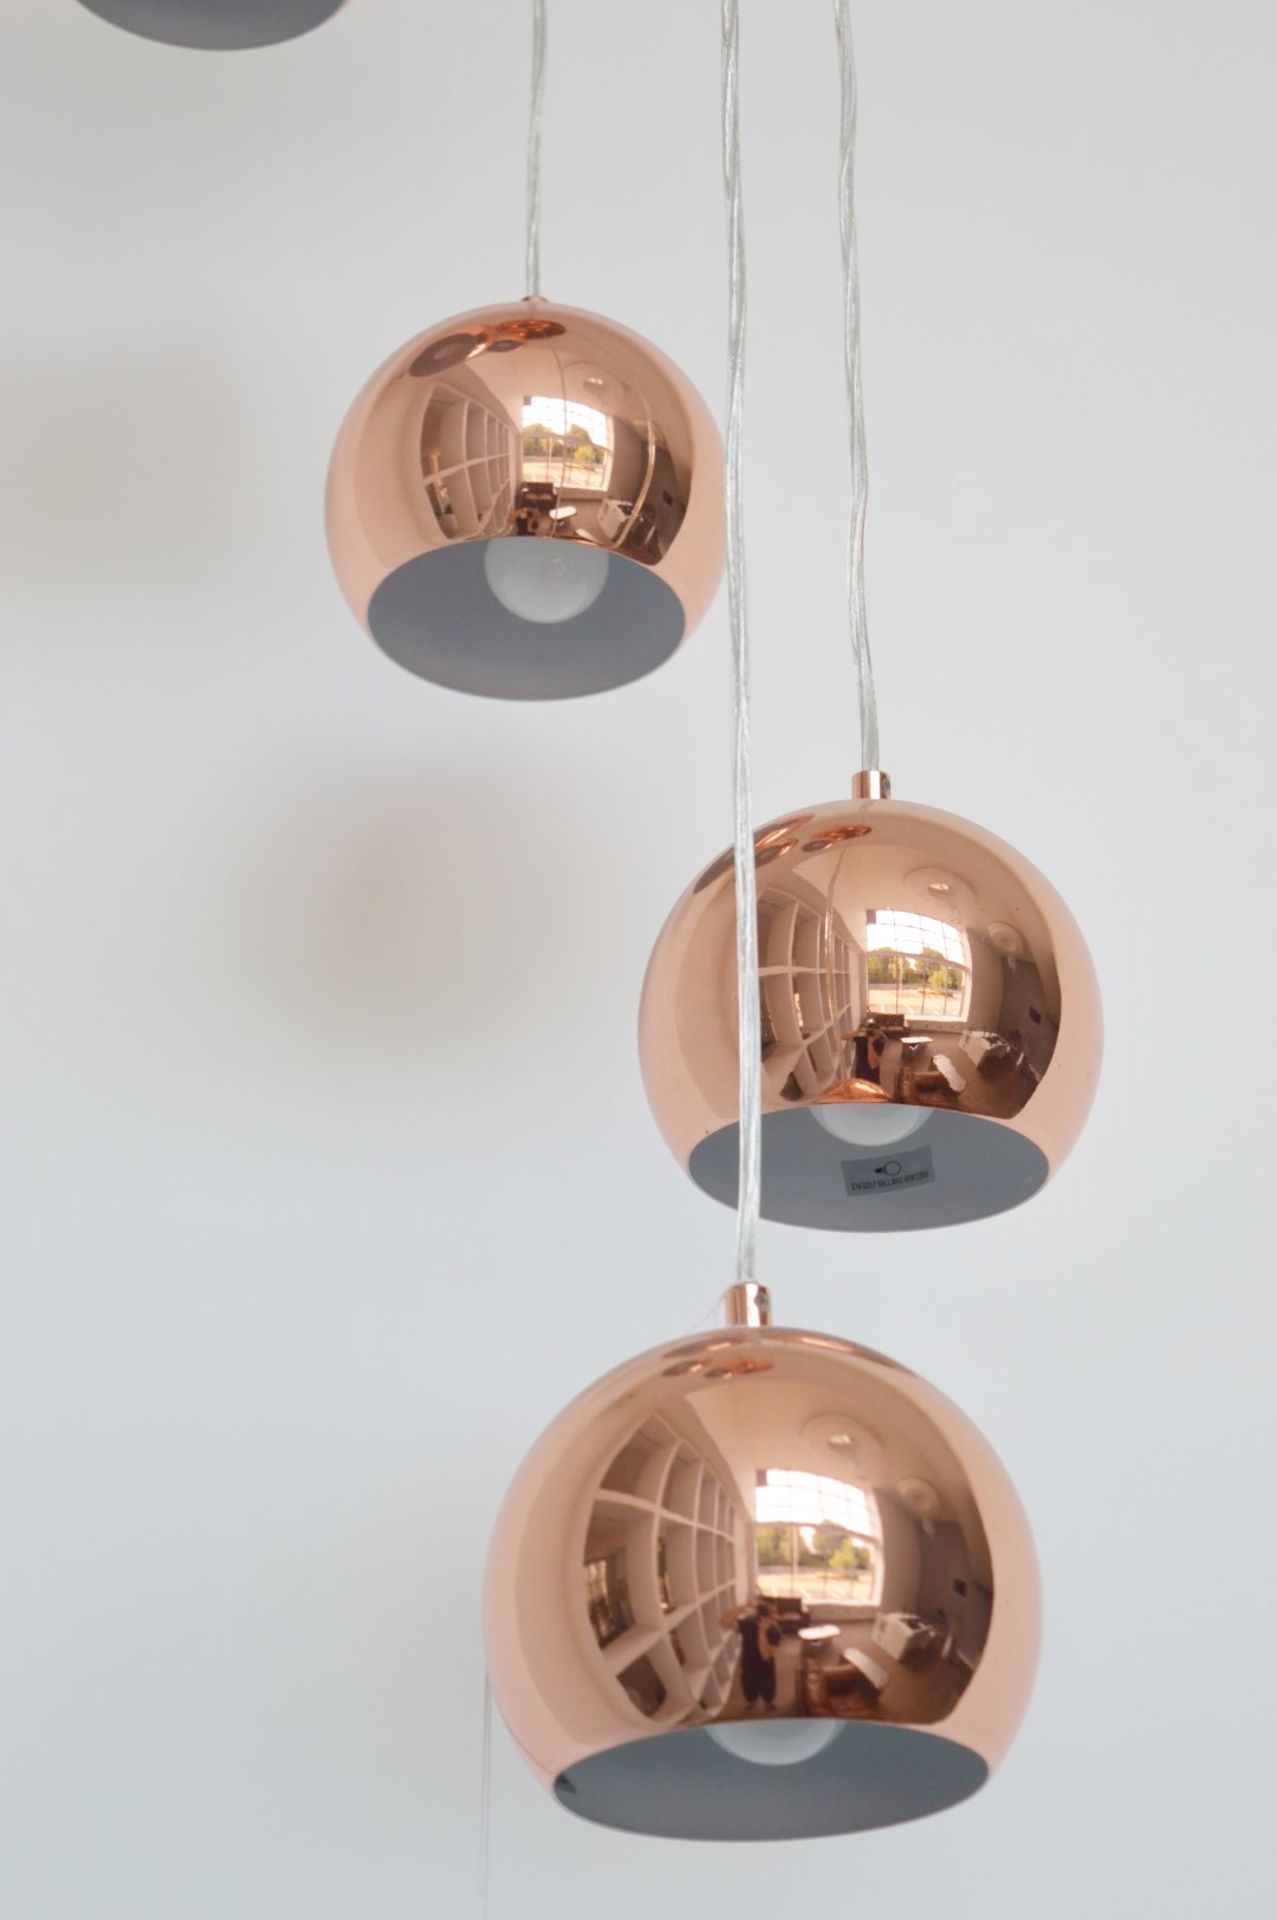 1 x Domas 5-Light Ceiling Light In Copper - Ex Display Stock - RRP £198.00 - Image 3 of 6